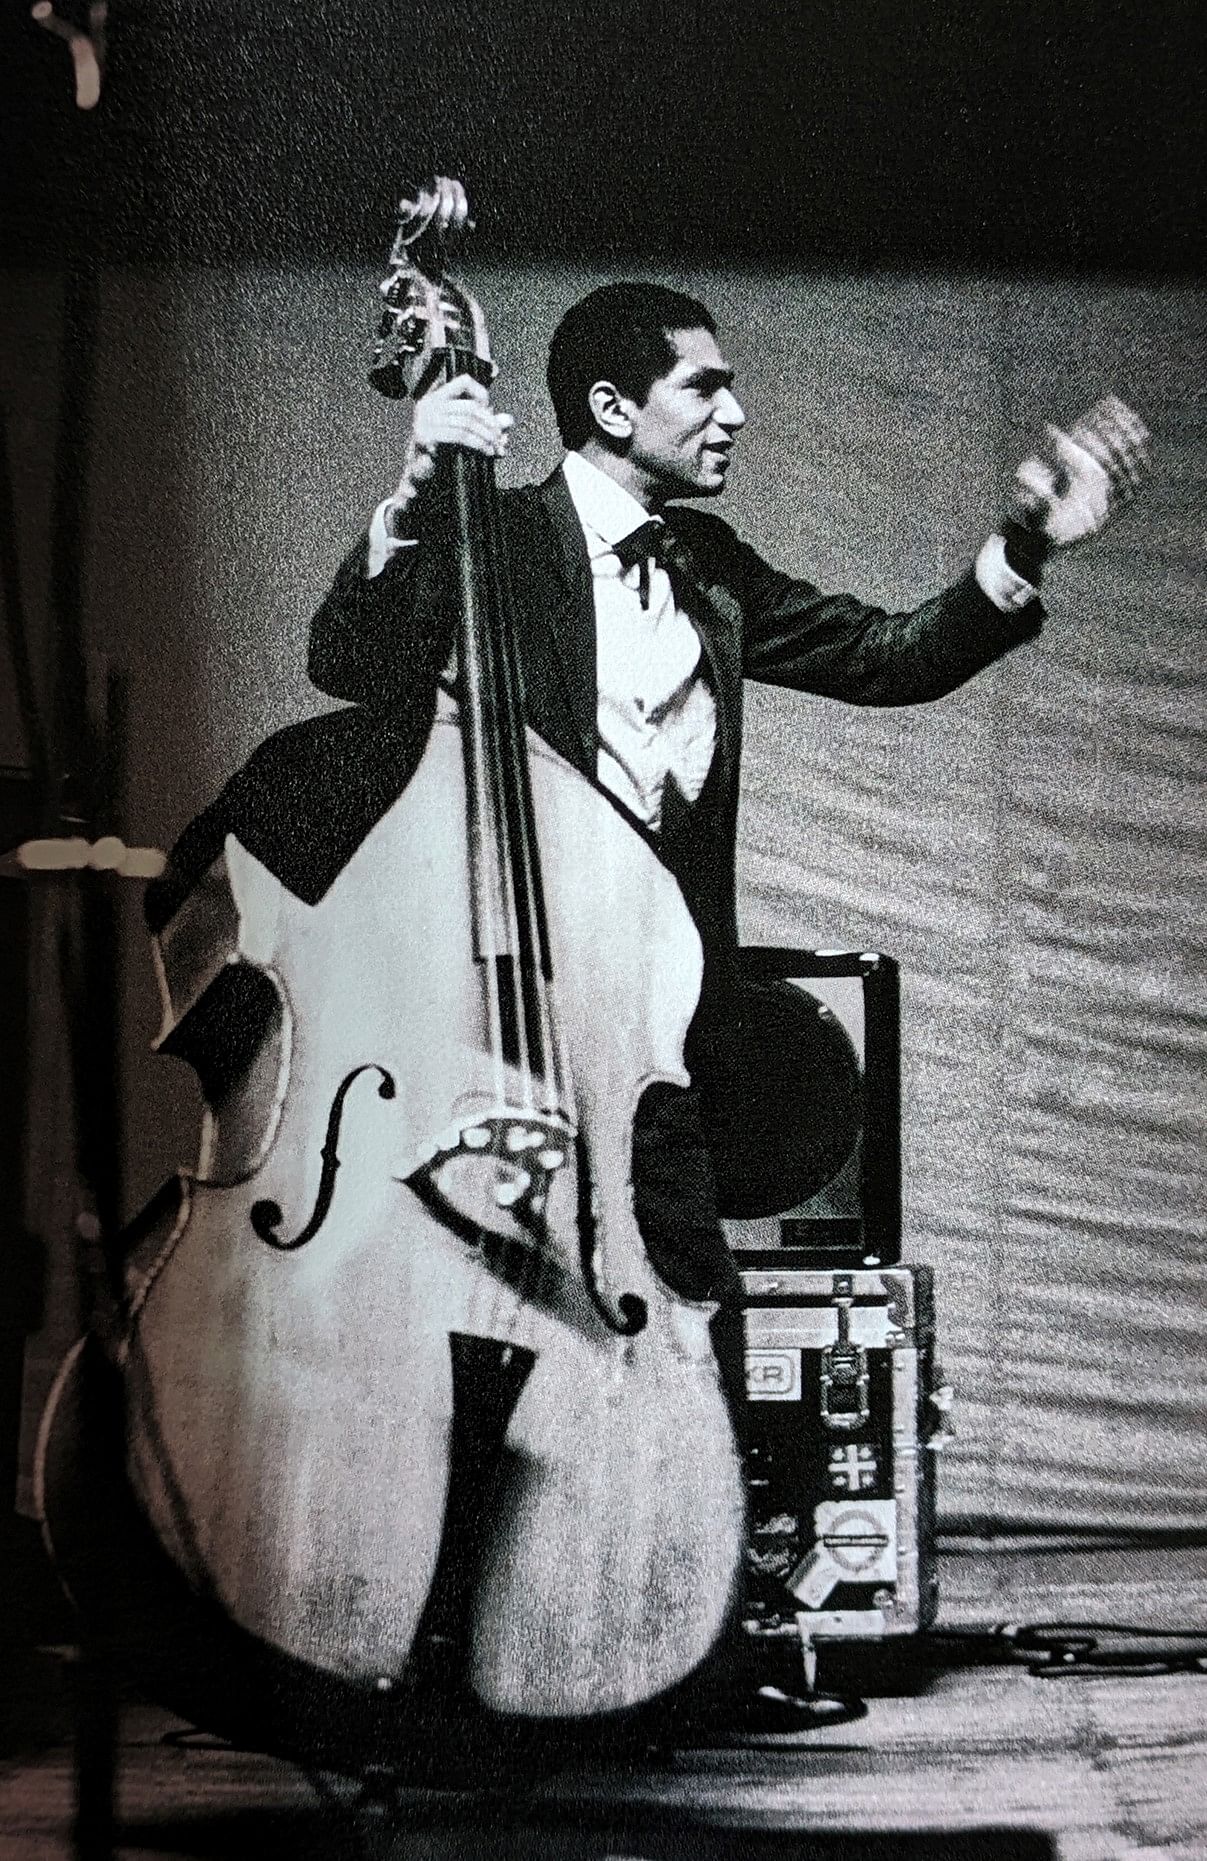 American double bassist and composer Stafford James